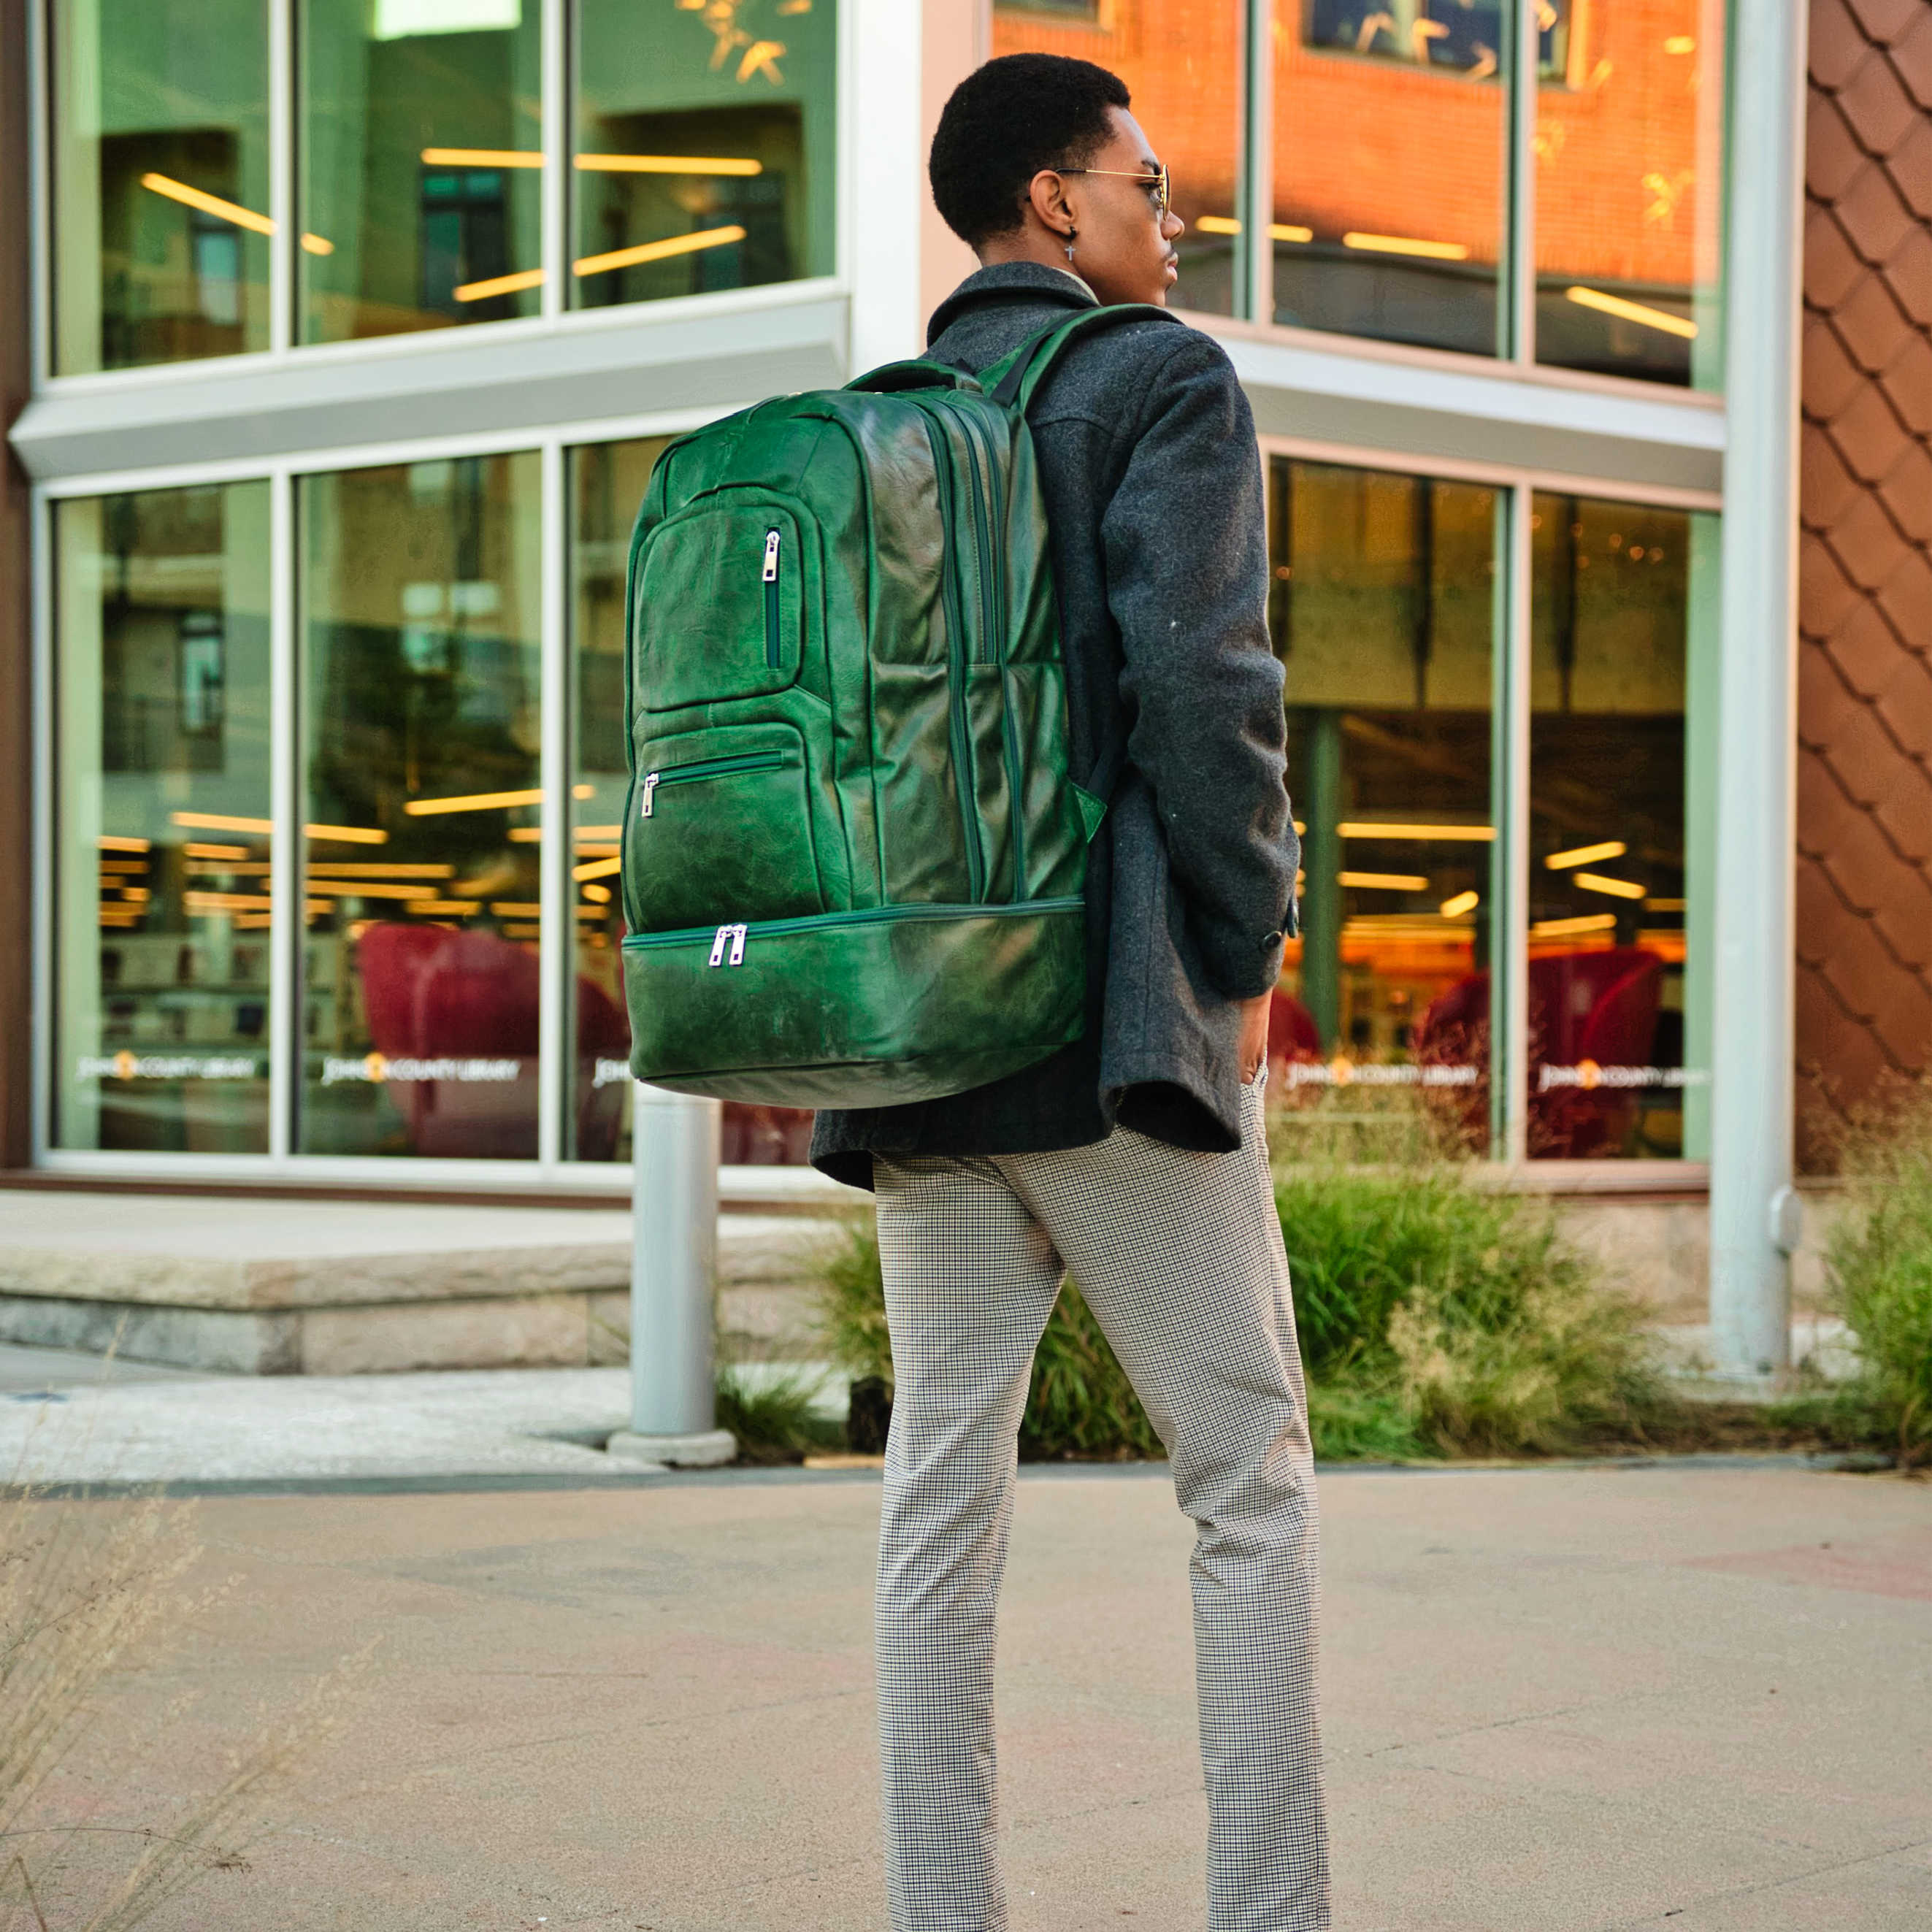 Emerald Green Leather Luxury Carry-On Backpack (Patented Signature Design Bag) - Sole Premise